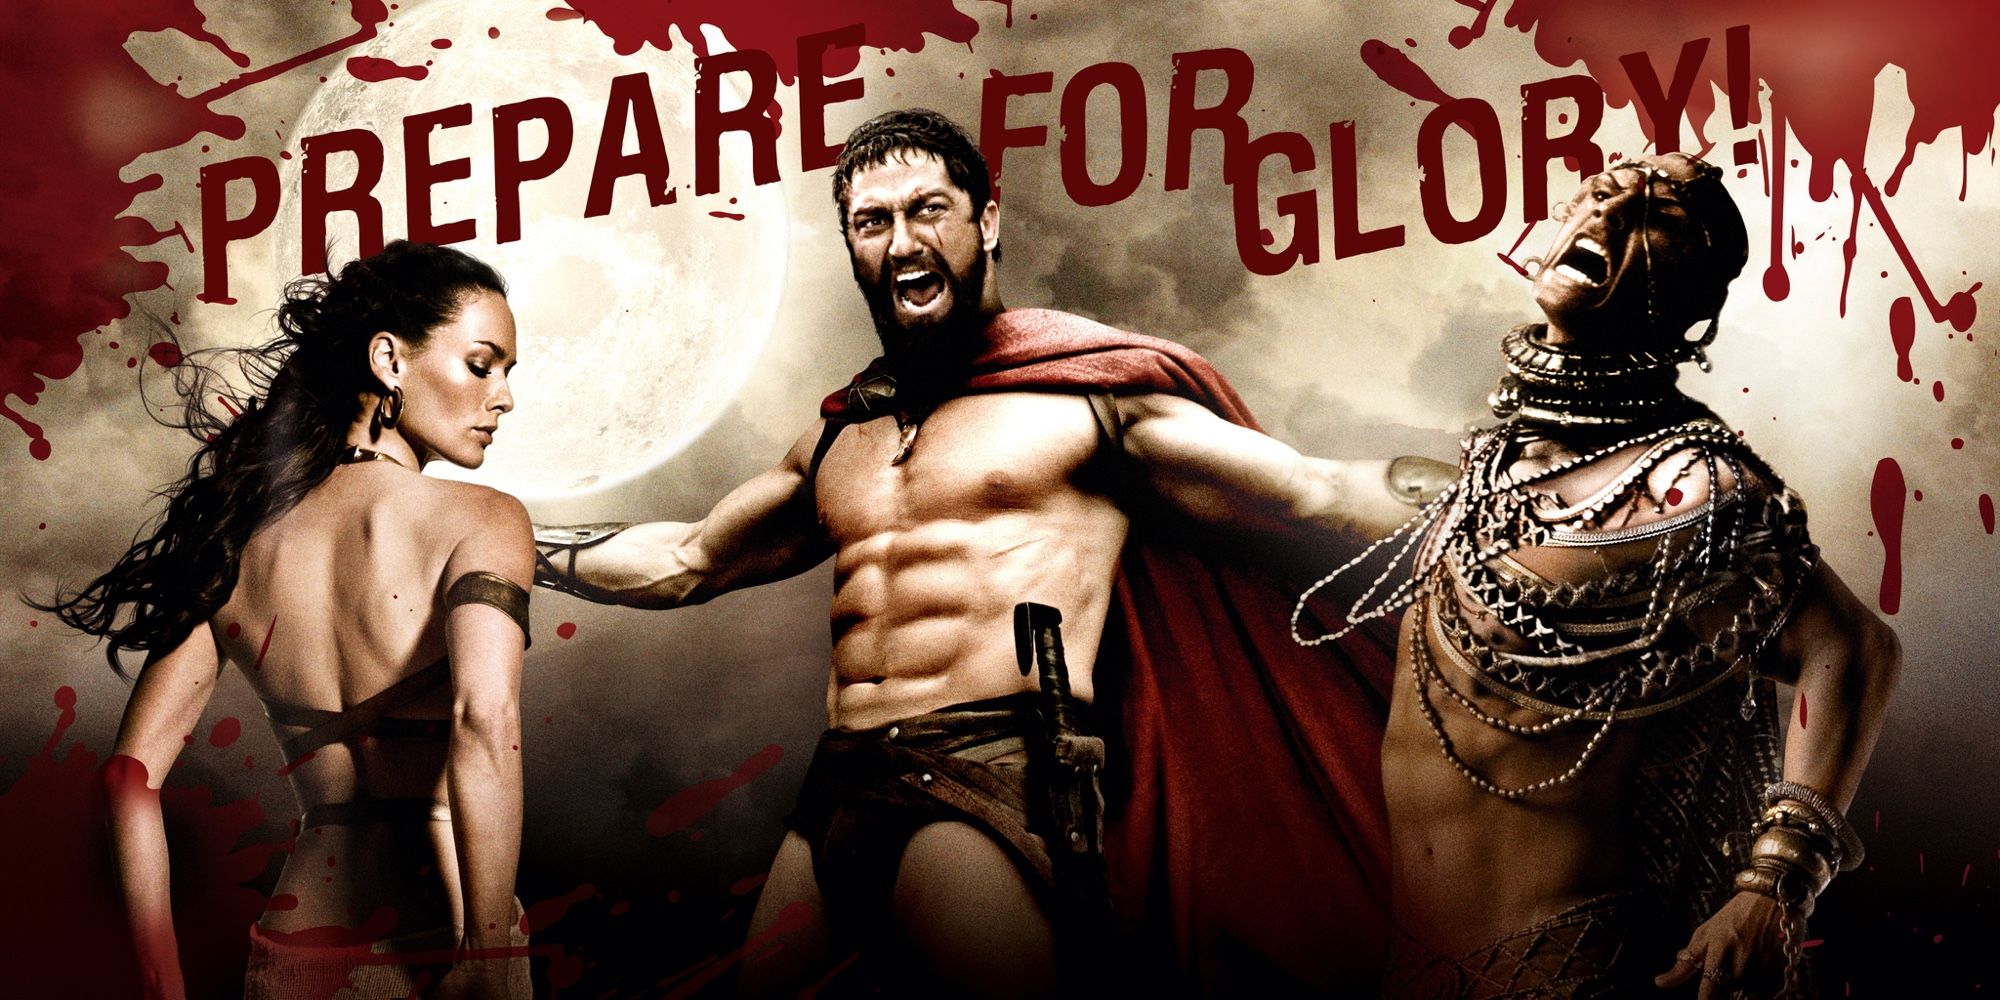 how accurate is the movie 300